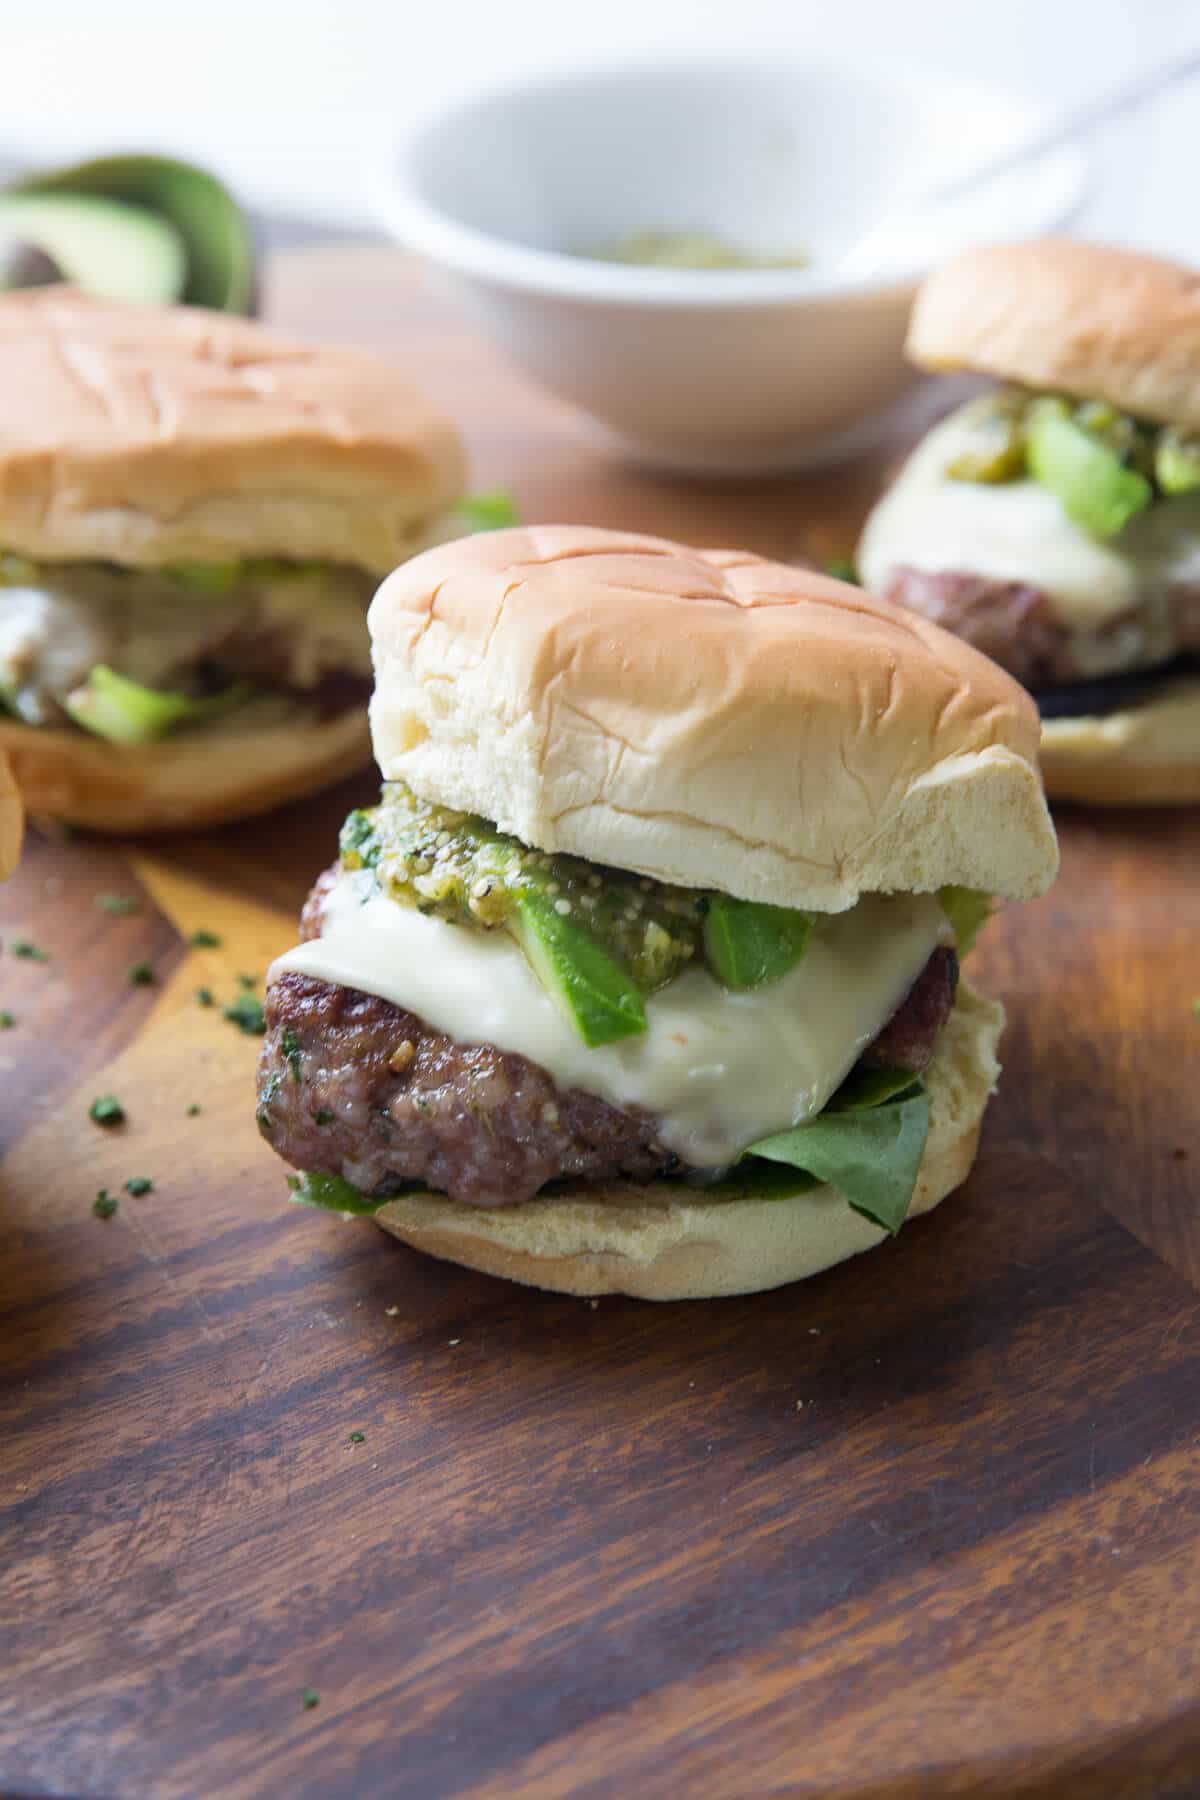 This pork burger is full of pie! The chile verde topping is outrageously good!